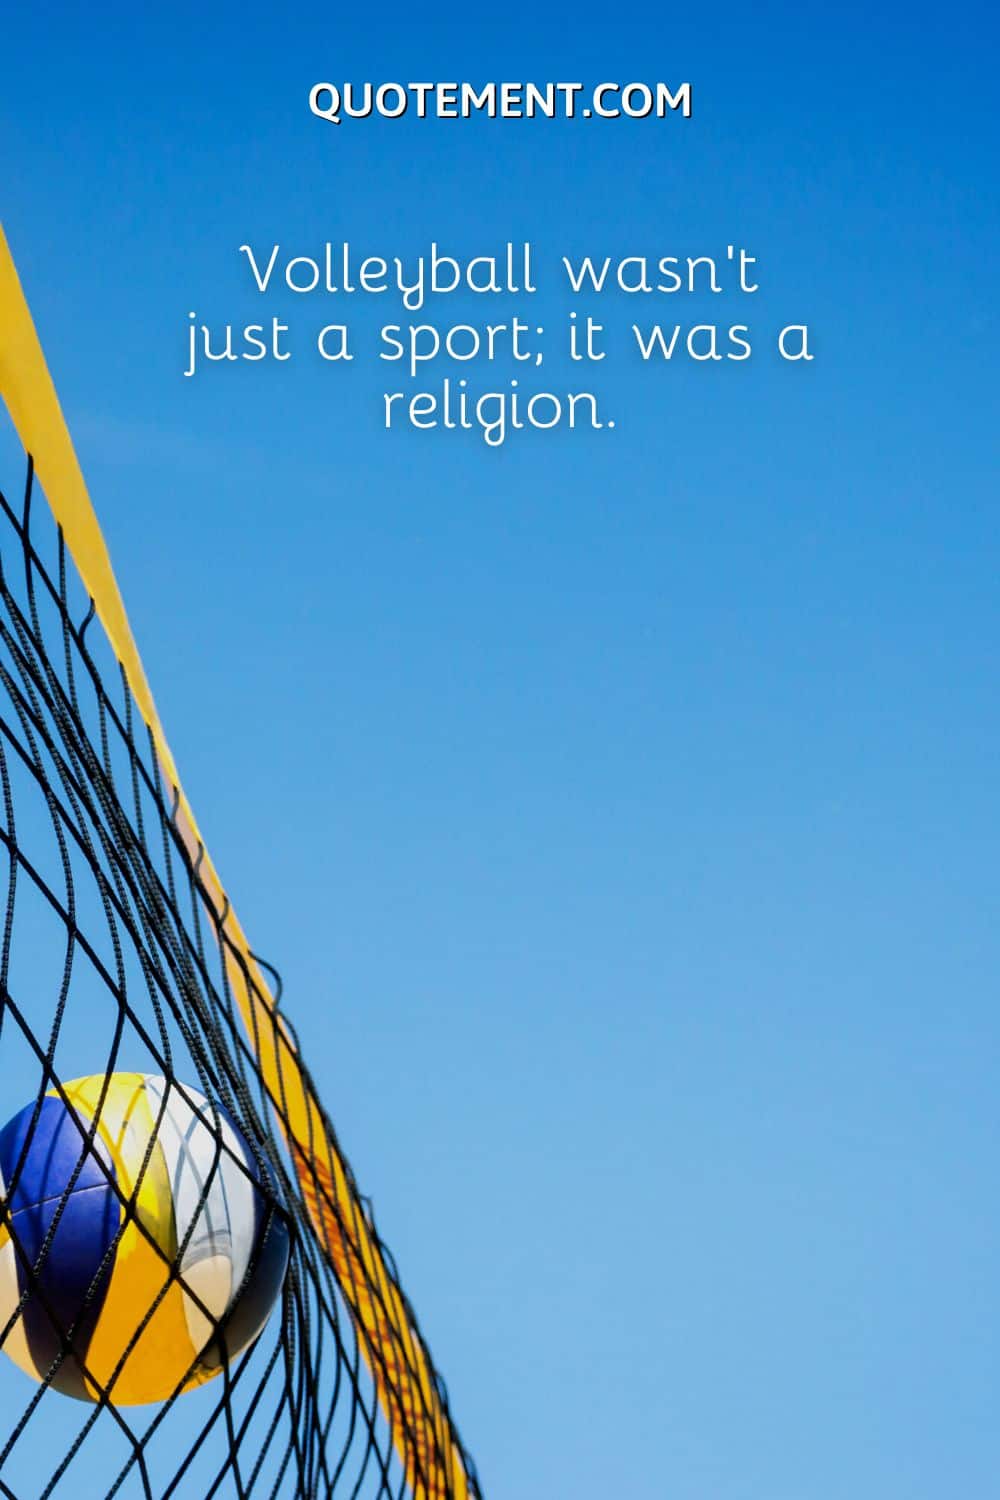 Volleyball wasn’t just a sport; it was a religion.